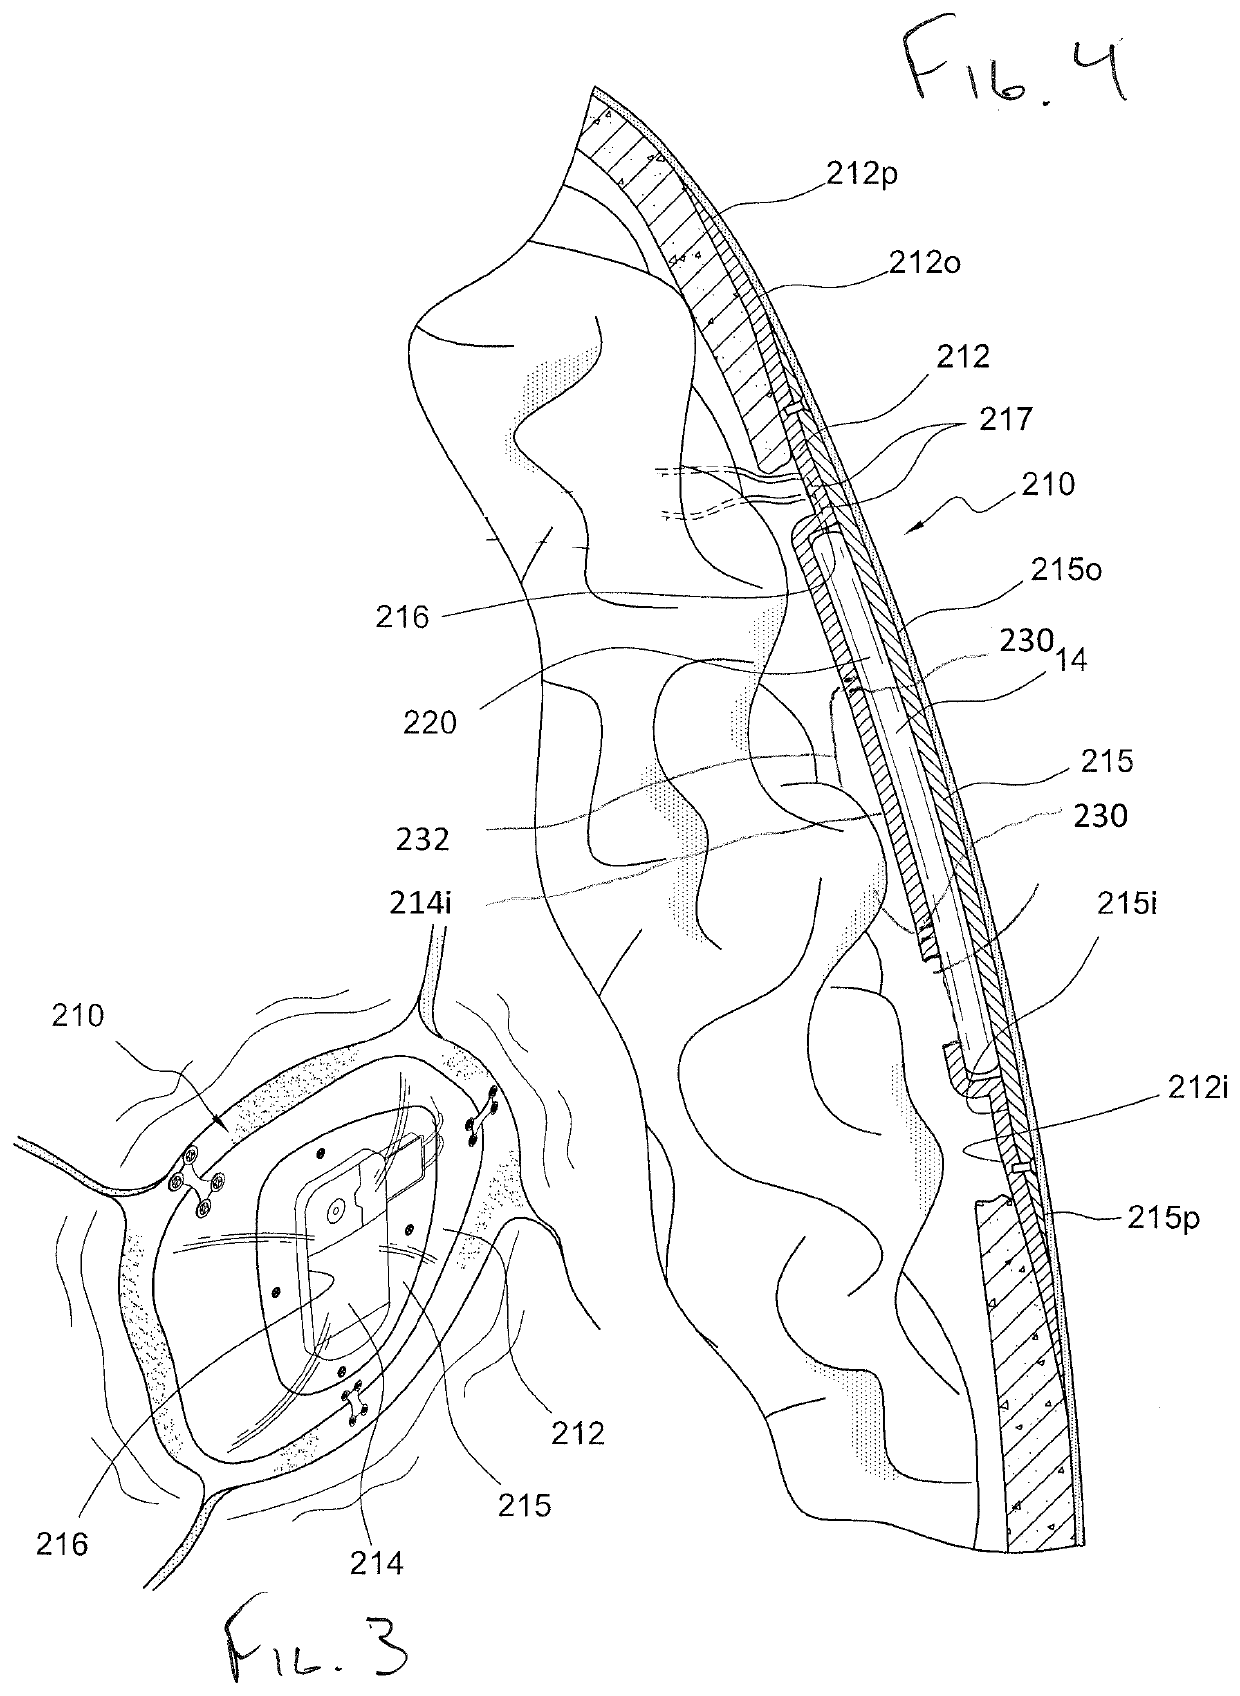 Low-profile intercranial device with enhancing grounding to ensure proper impedance measurements